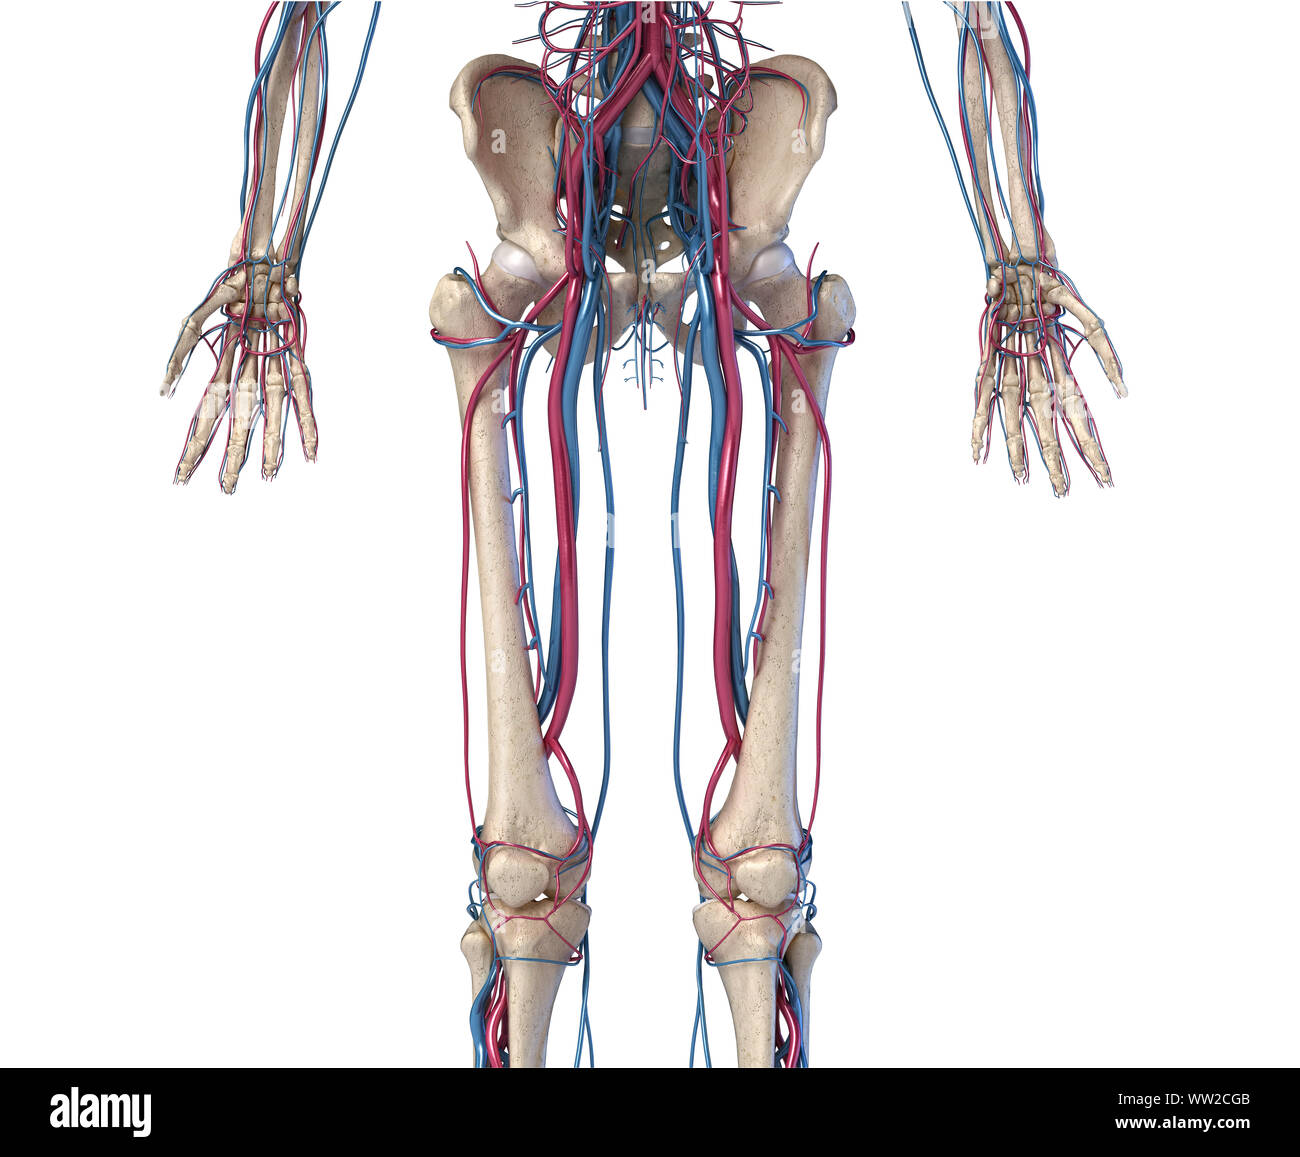 Human body anatomy. 3d illustration of Hip, legs and hands skeletal and cardiovascular systems. Viewed from the front. On white background. Stock Photo